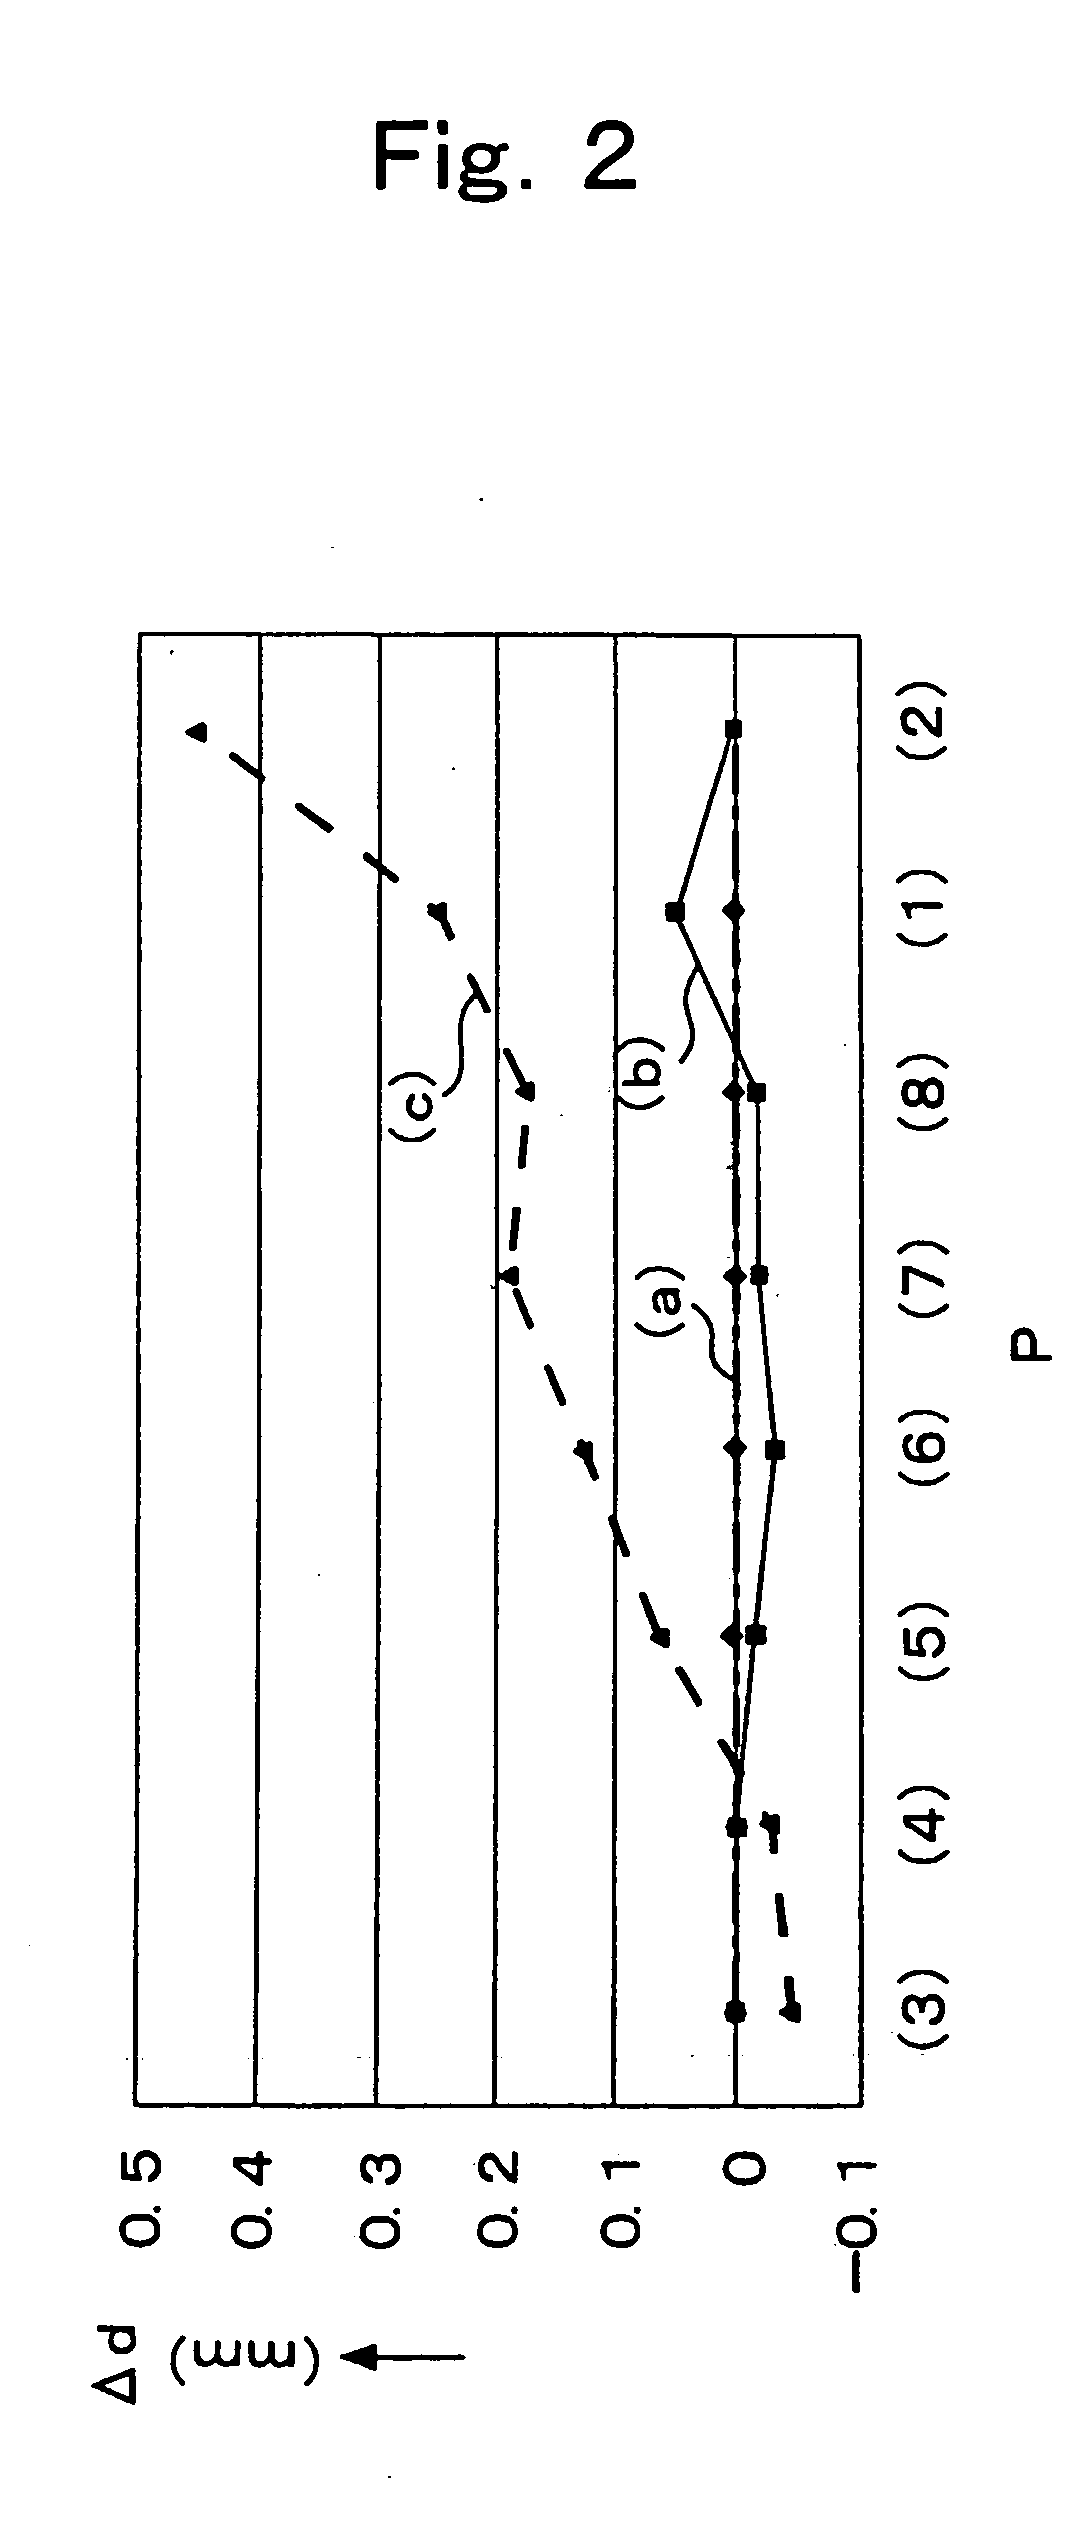 Biaxially oriented, blown-molded bottles and preform thereof